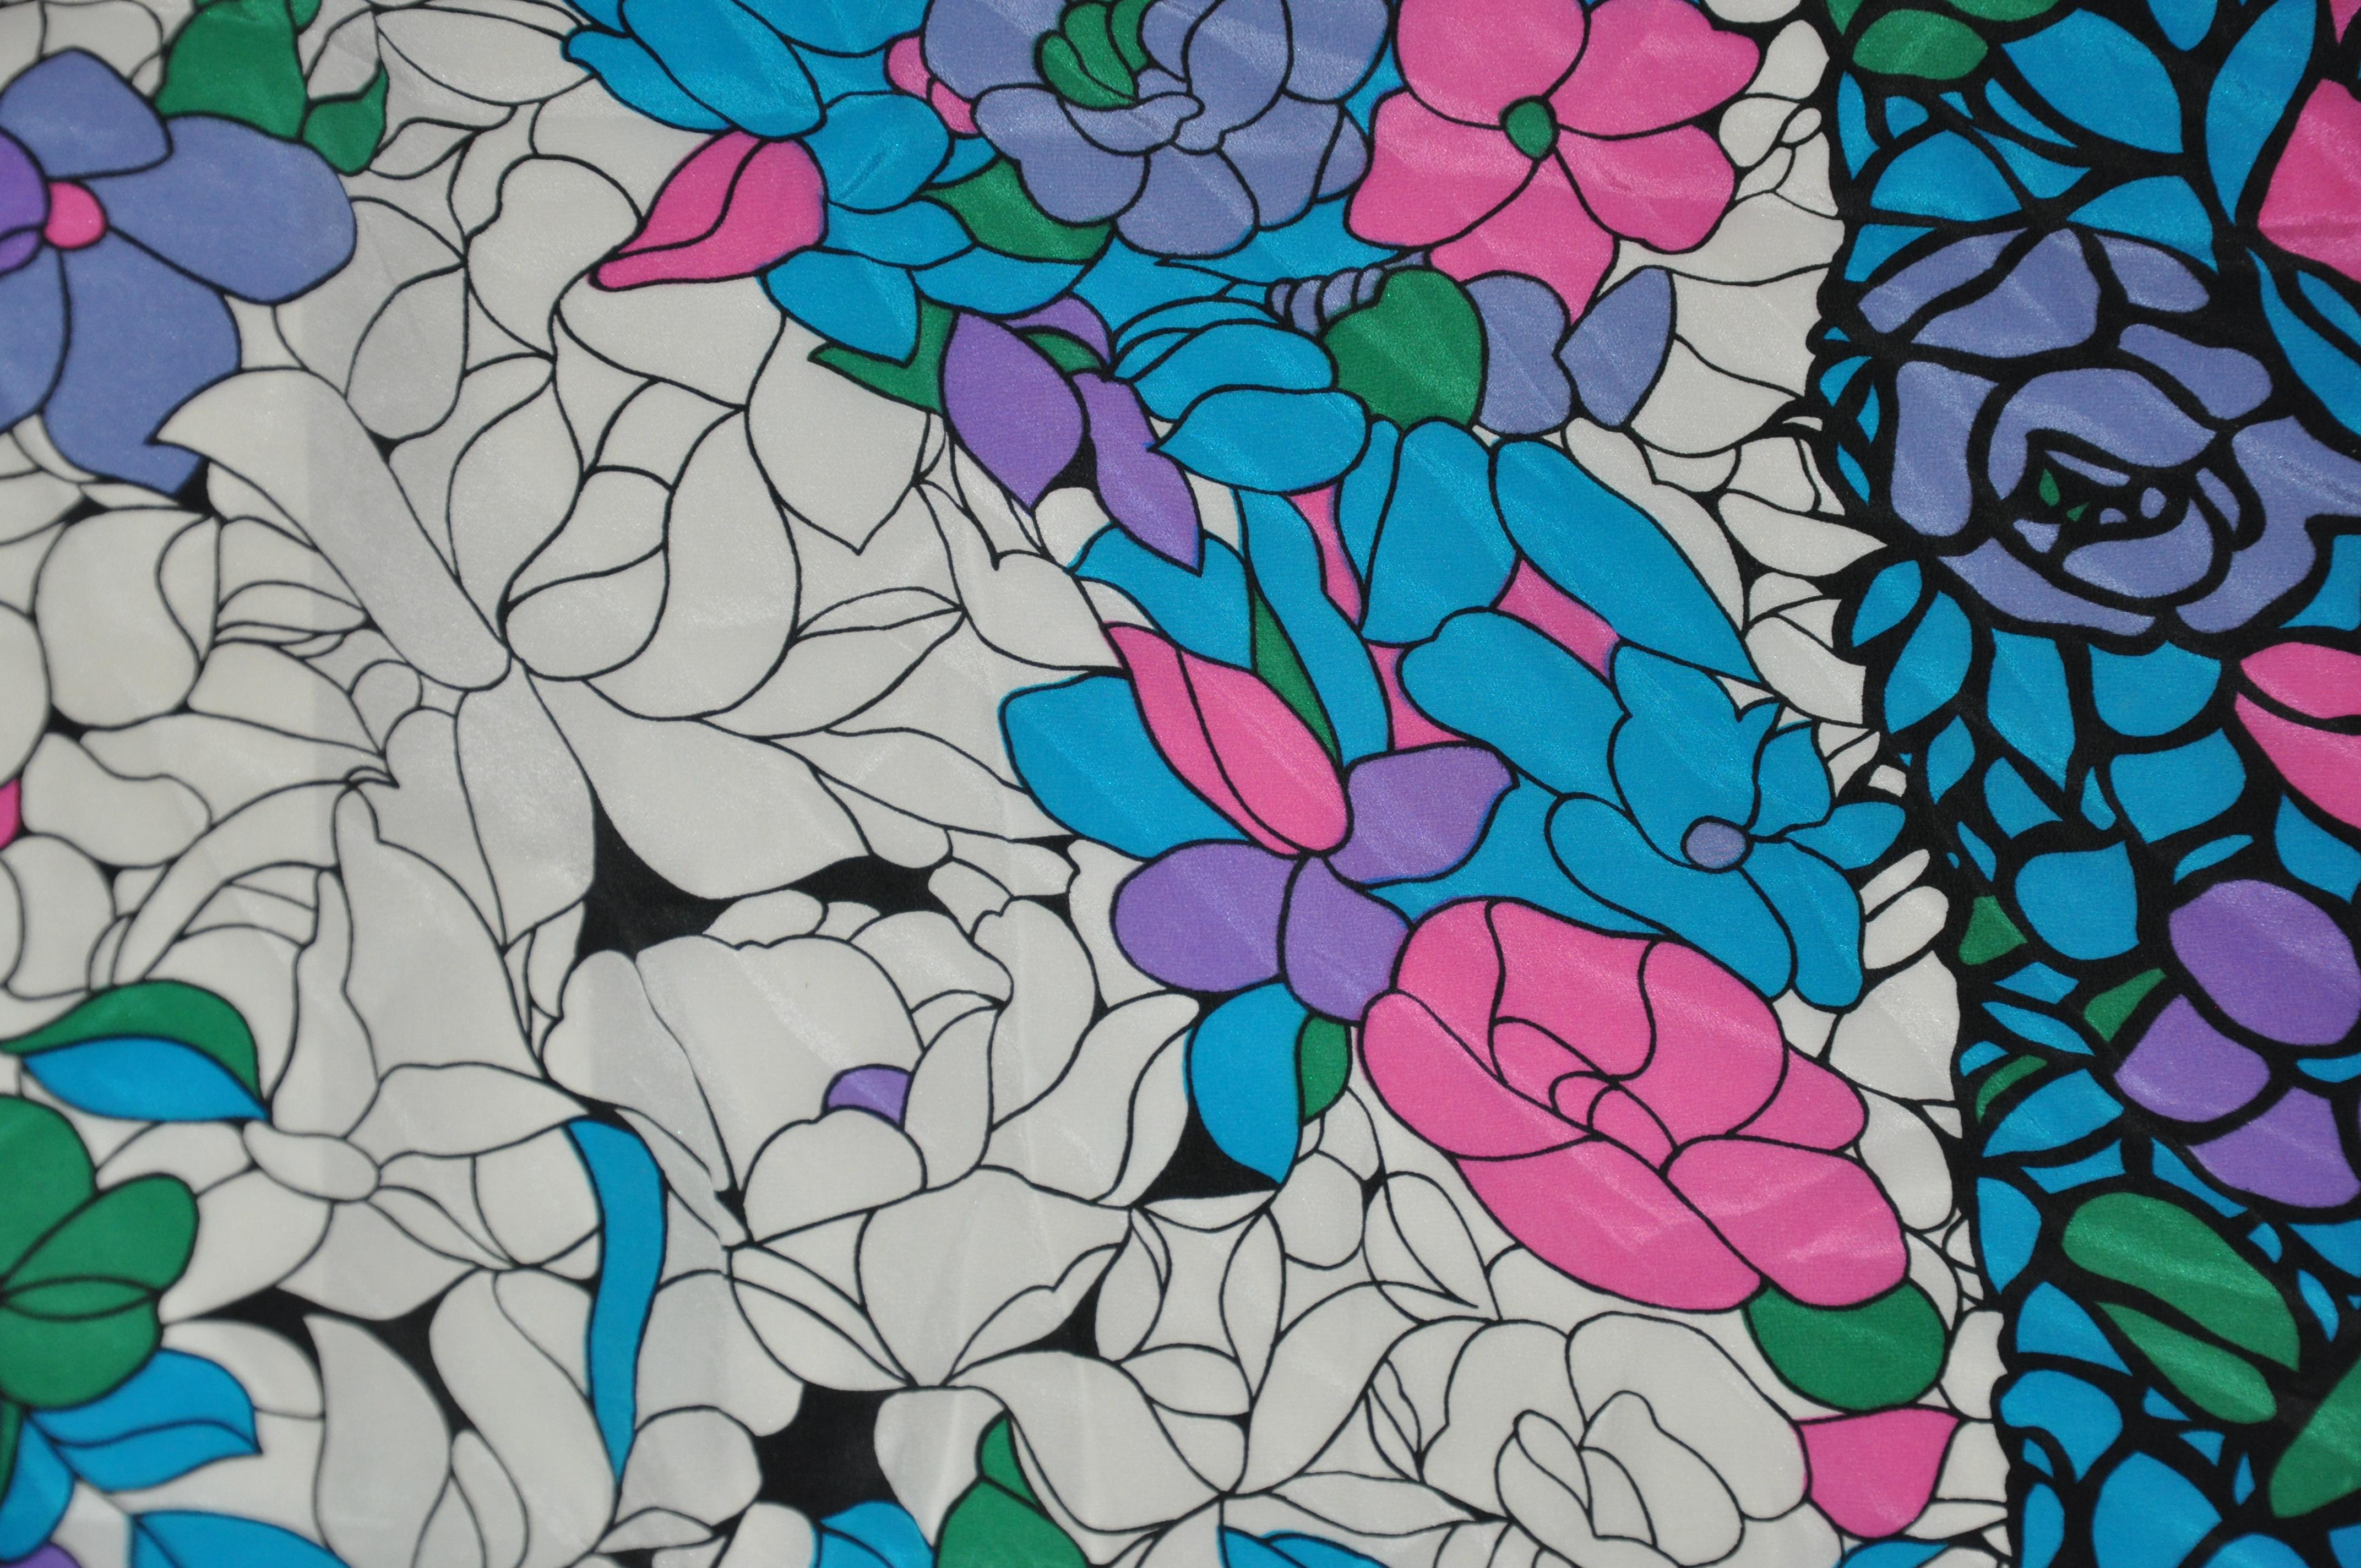 Blue Tibi Wonderfully Whimsical Shades of Turquoise & Popping Pinks Floral Silk Scarf For Sale